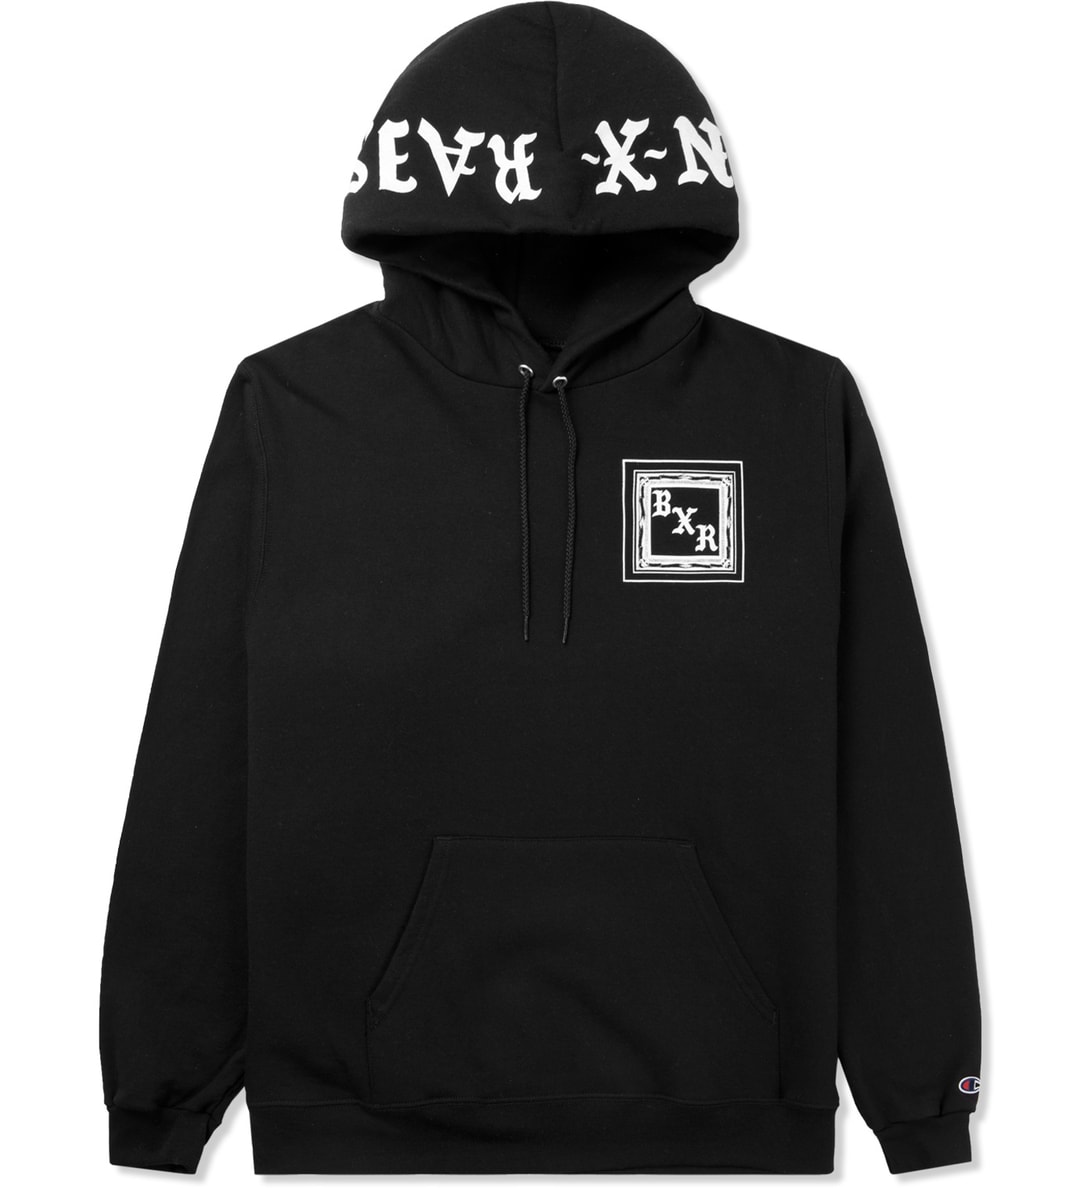 Born x Raised - Black BXR Flag Pullover Hoodie | HBX - Globally Curated ...